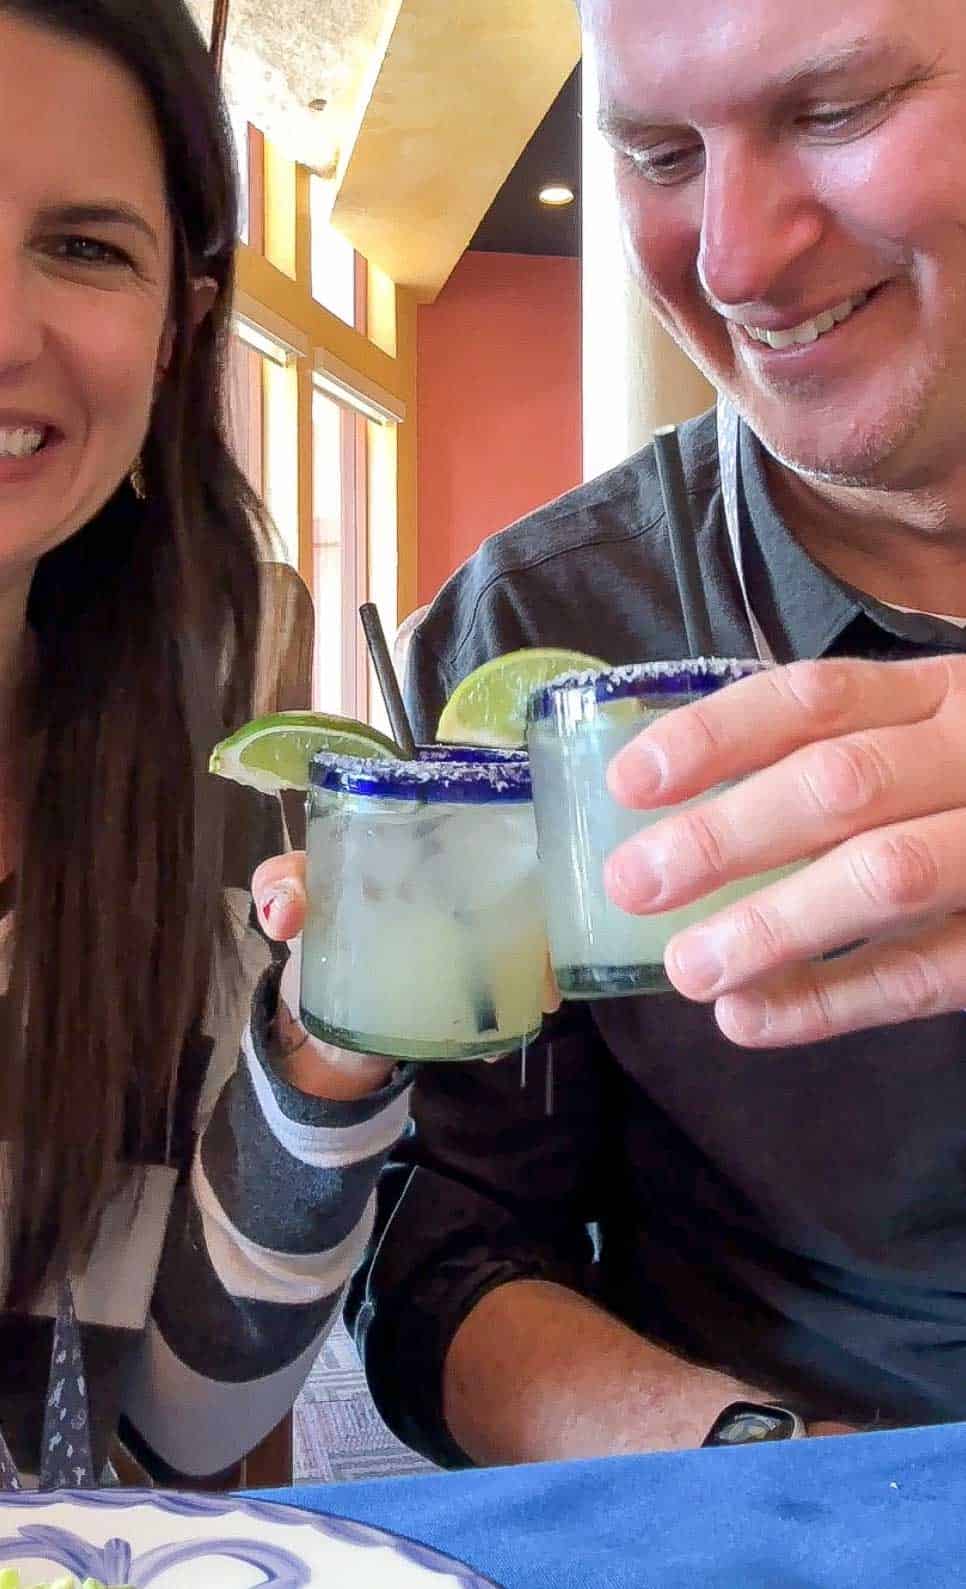 A man and woman holding margaritas in clear blue rimmed glasses and doing cheers with them.